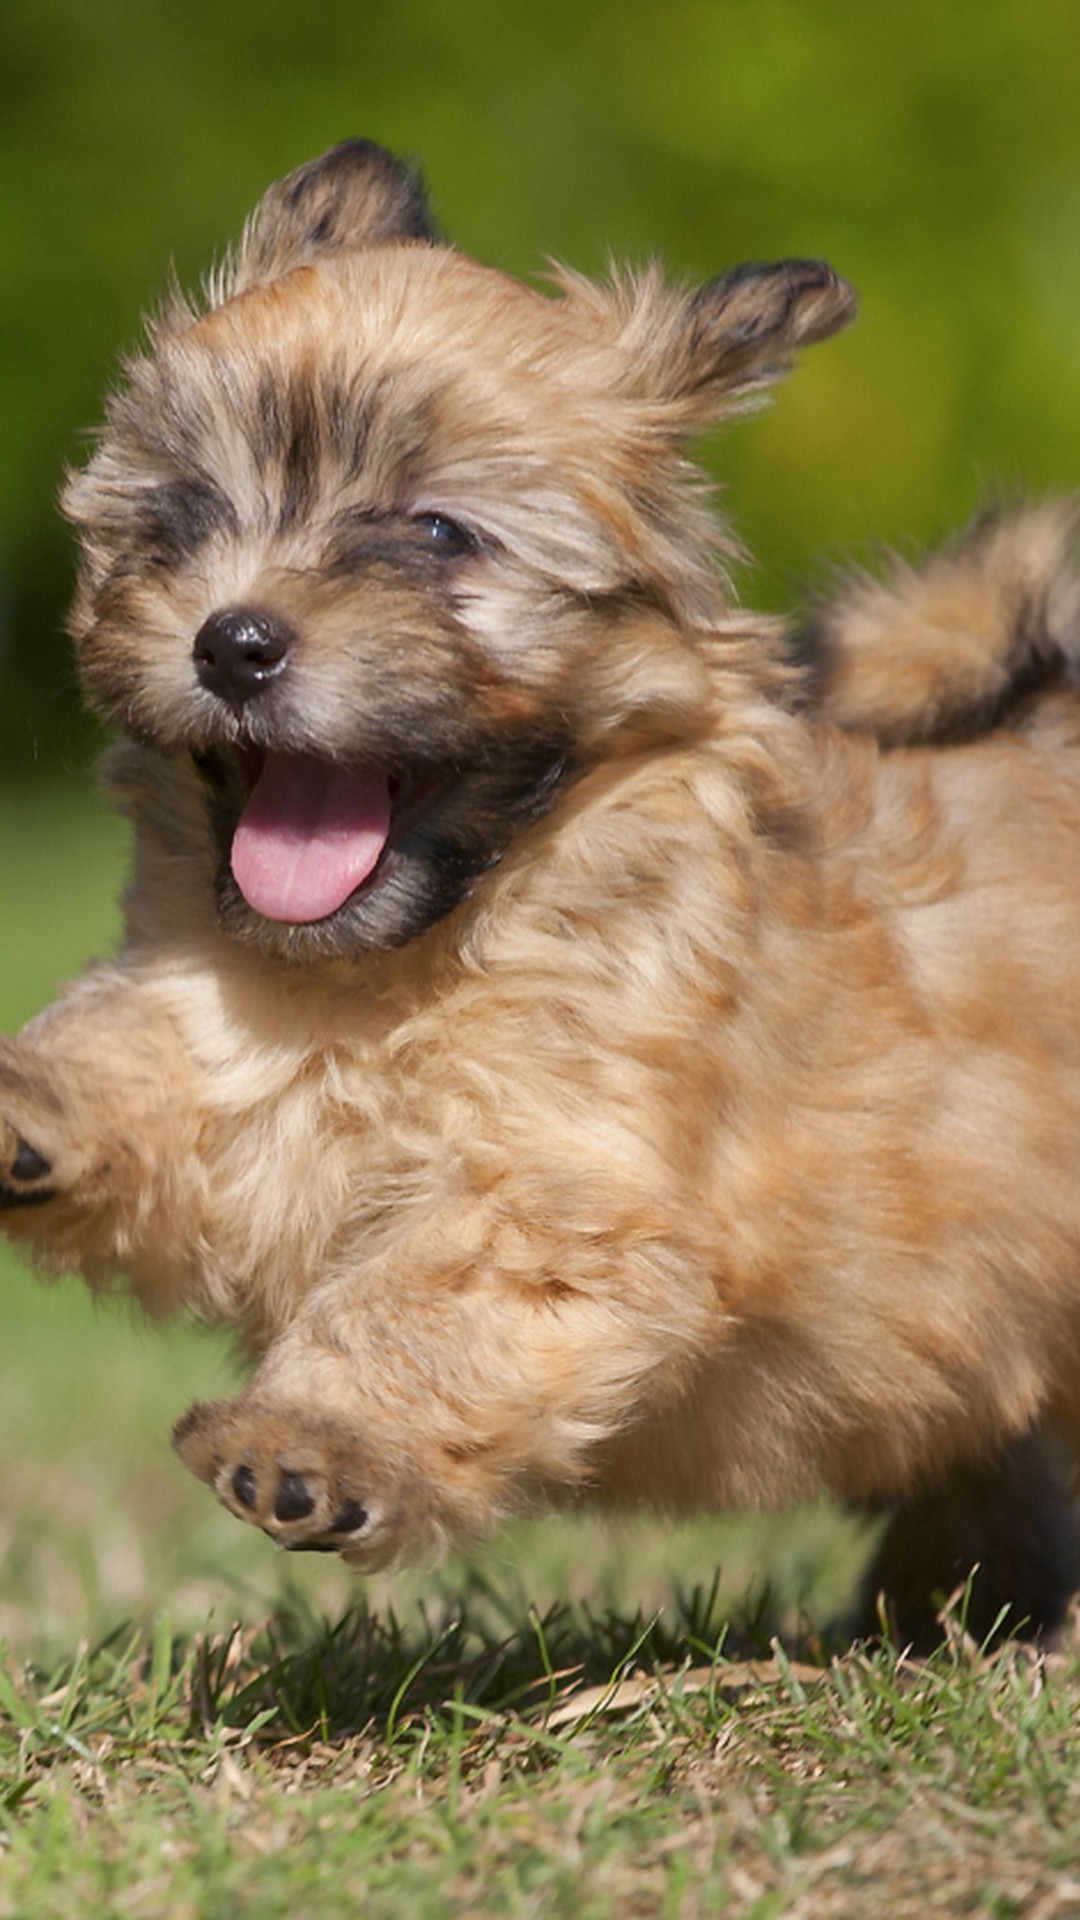 Cute Puppies Backgrounds For Android With Hd Resolution - Small Dog For Rehoming Uk - HD Wallpaper 